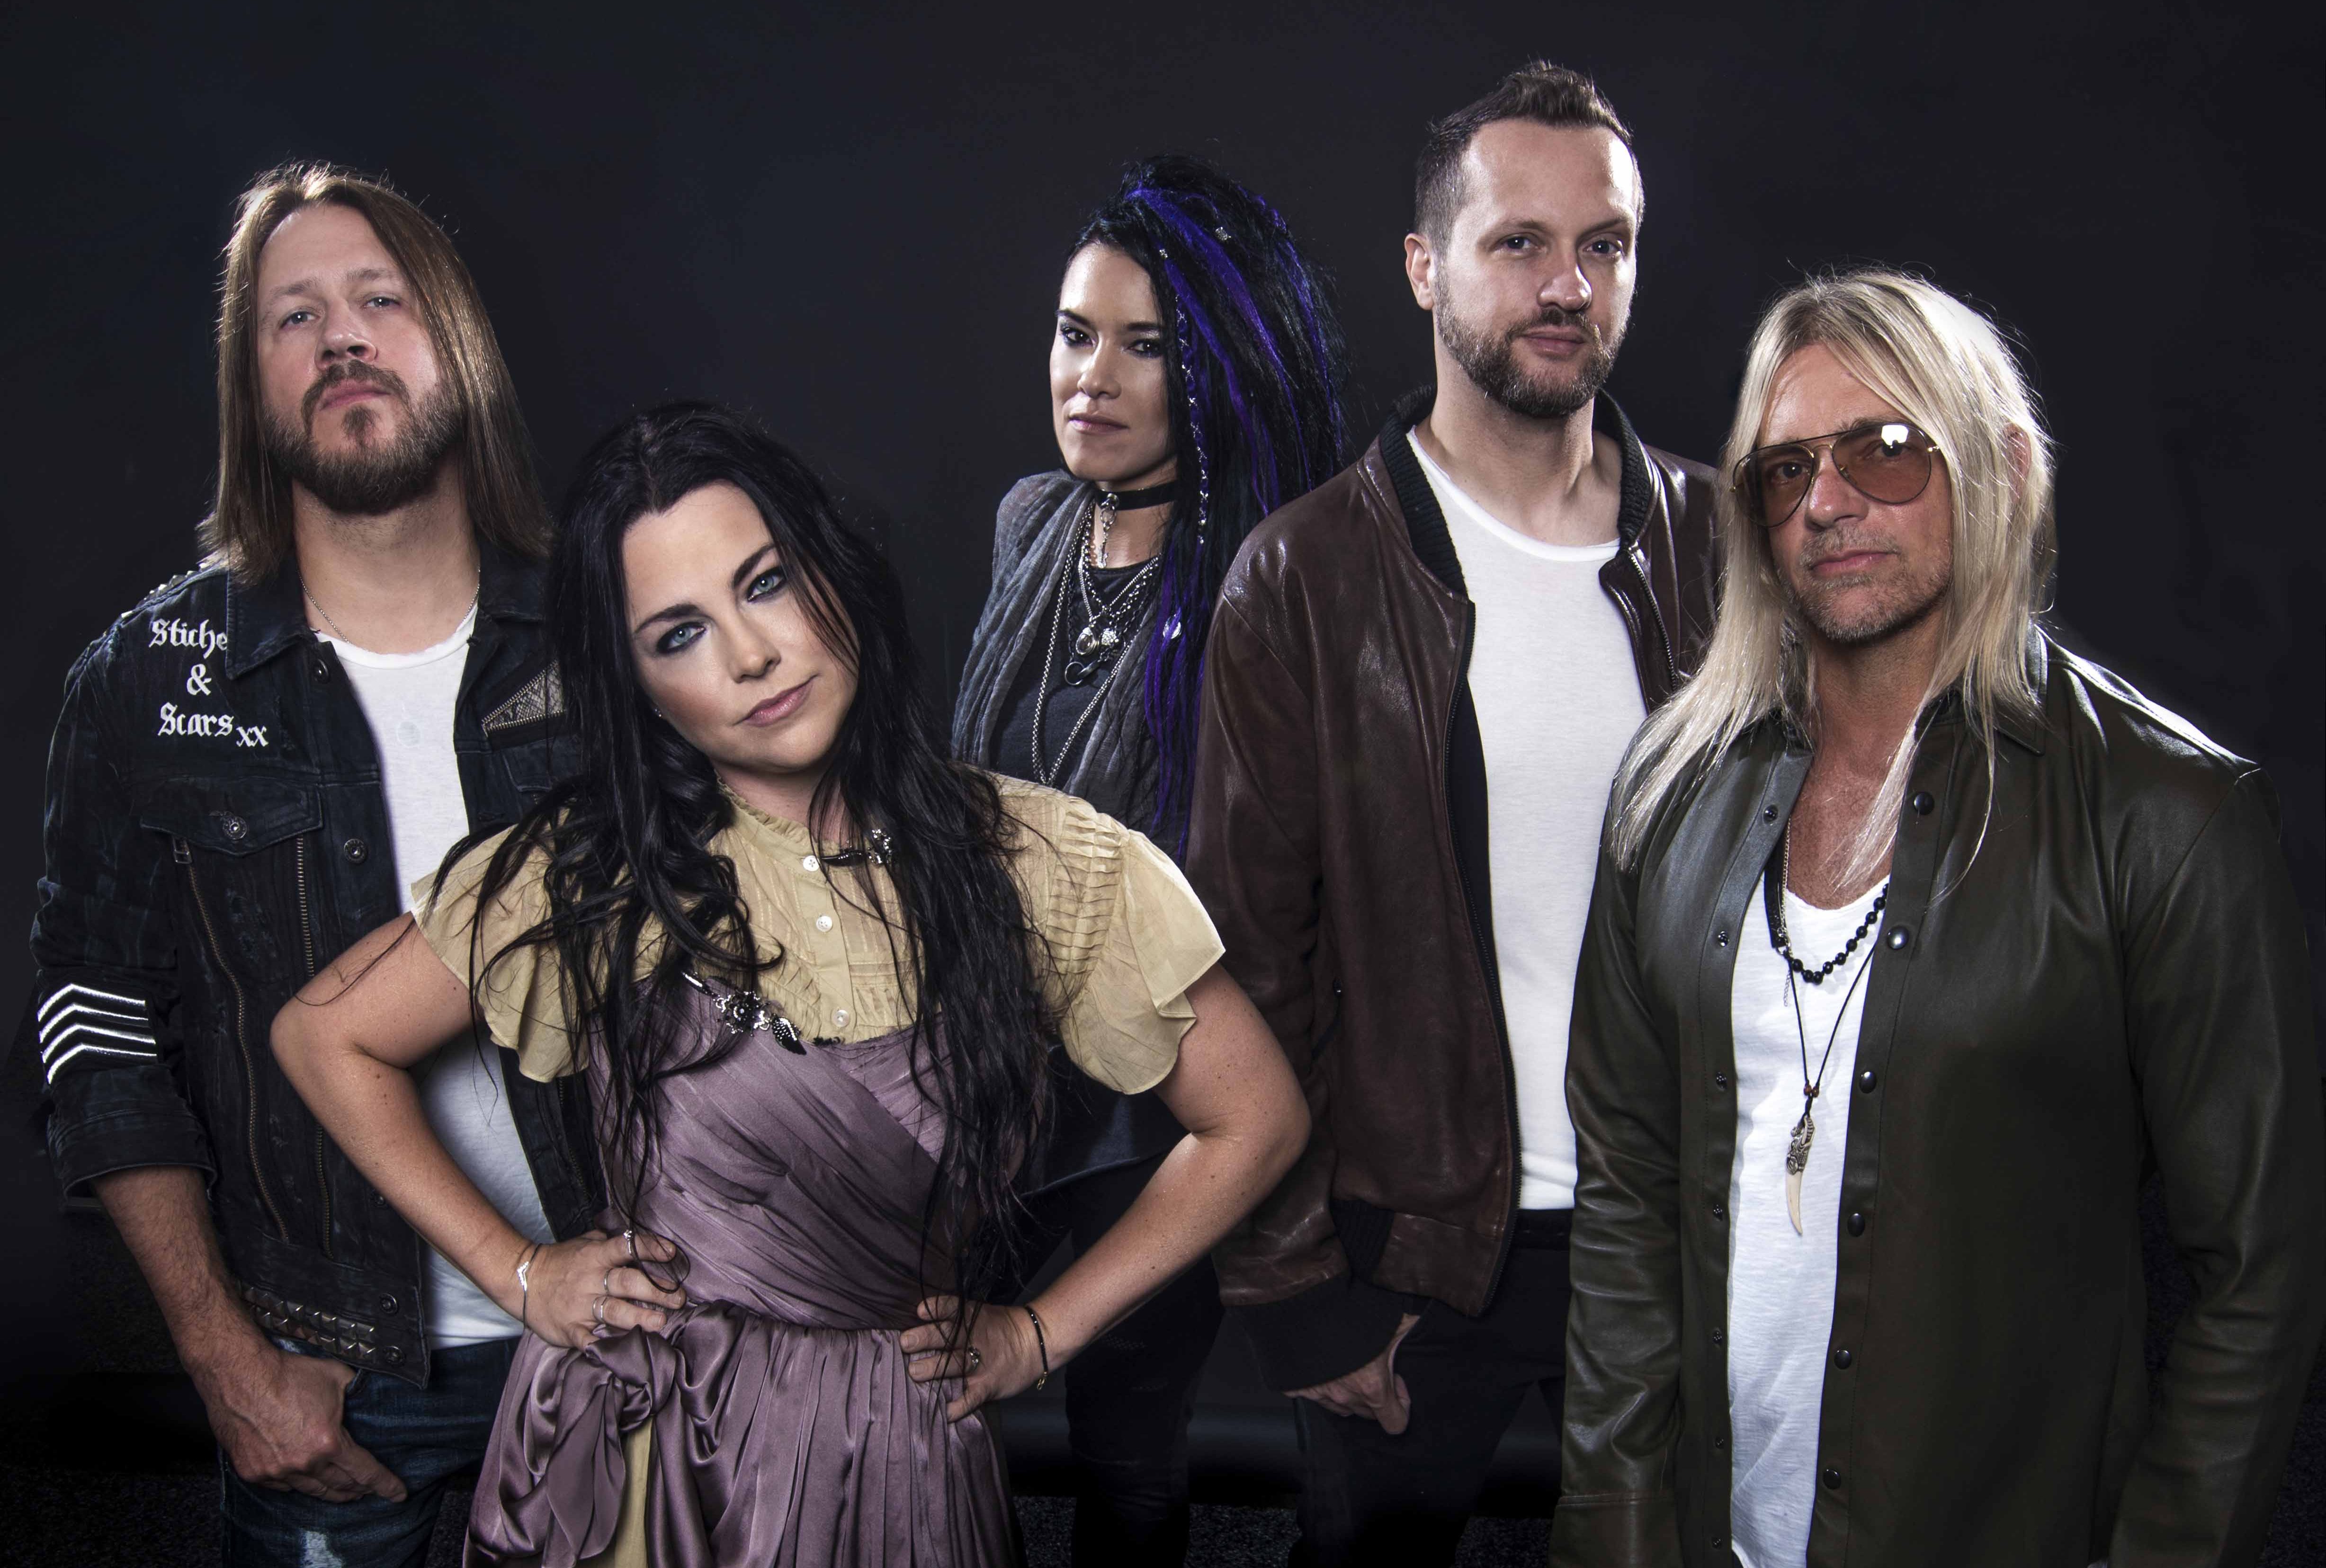 Evanescence and Within Temptation announce co-headline European tour